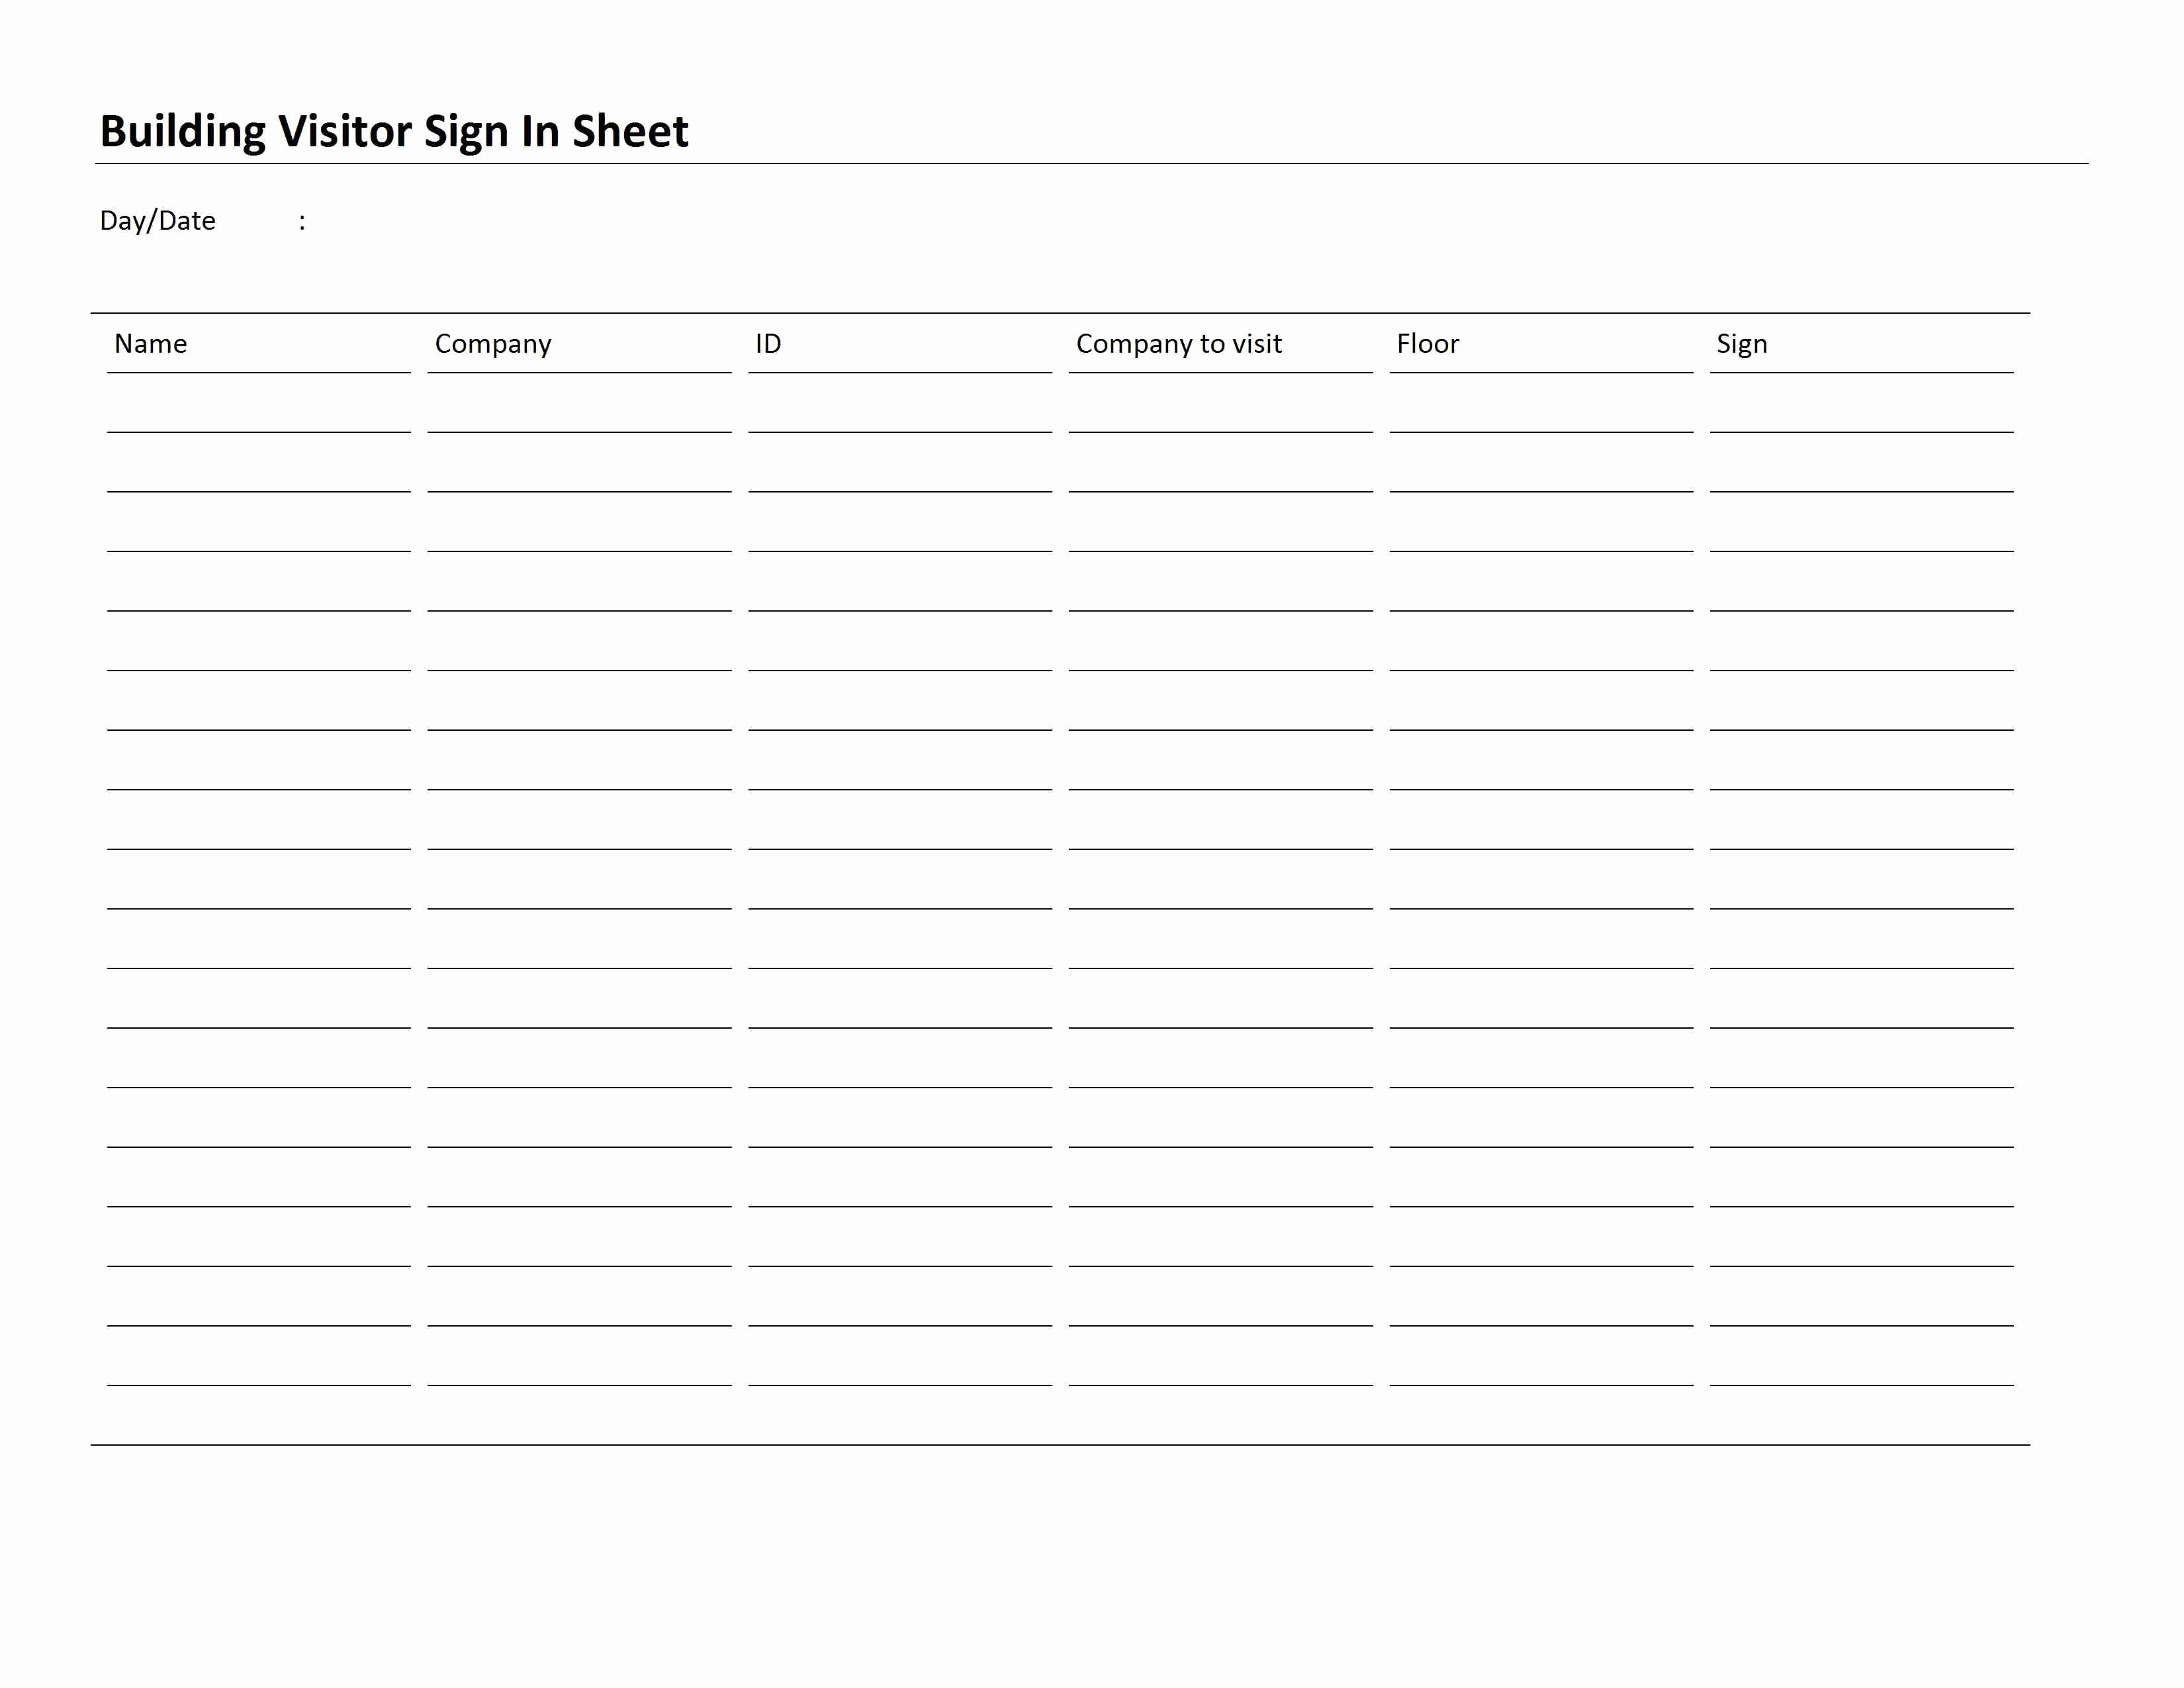 Building Visitor Sign In Sheet